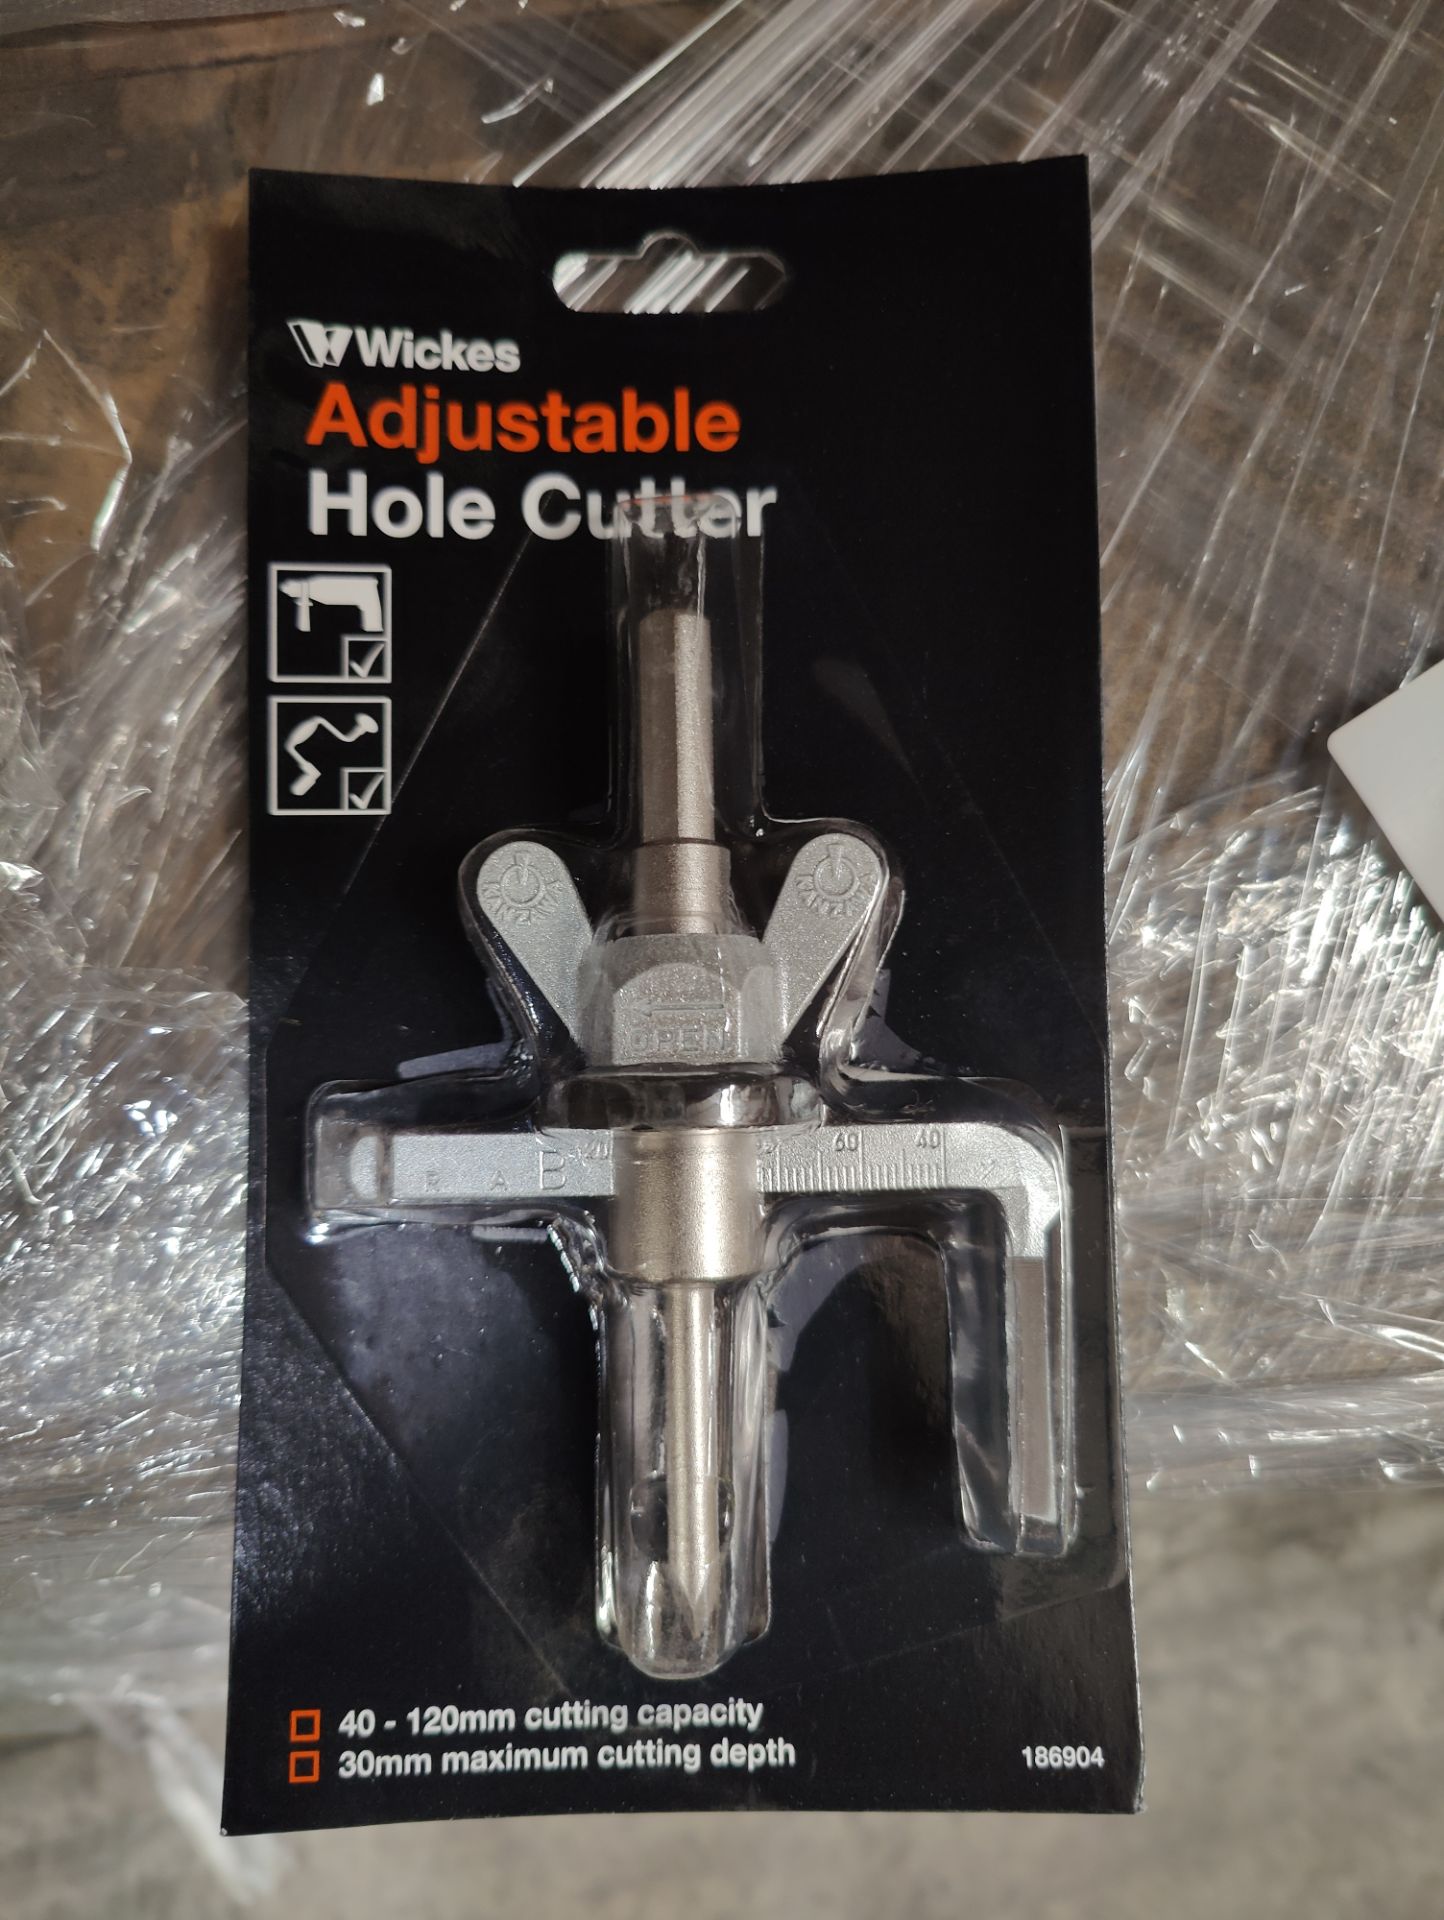 2 BOXES CONTAINING AROUND 120 ADJUSTABLE HOLE CUTTERS DRILL PIECE